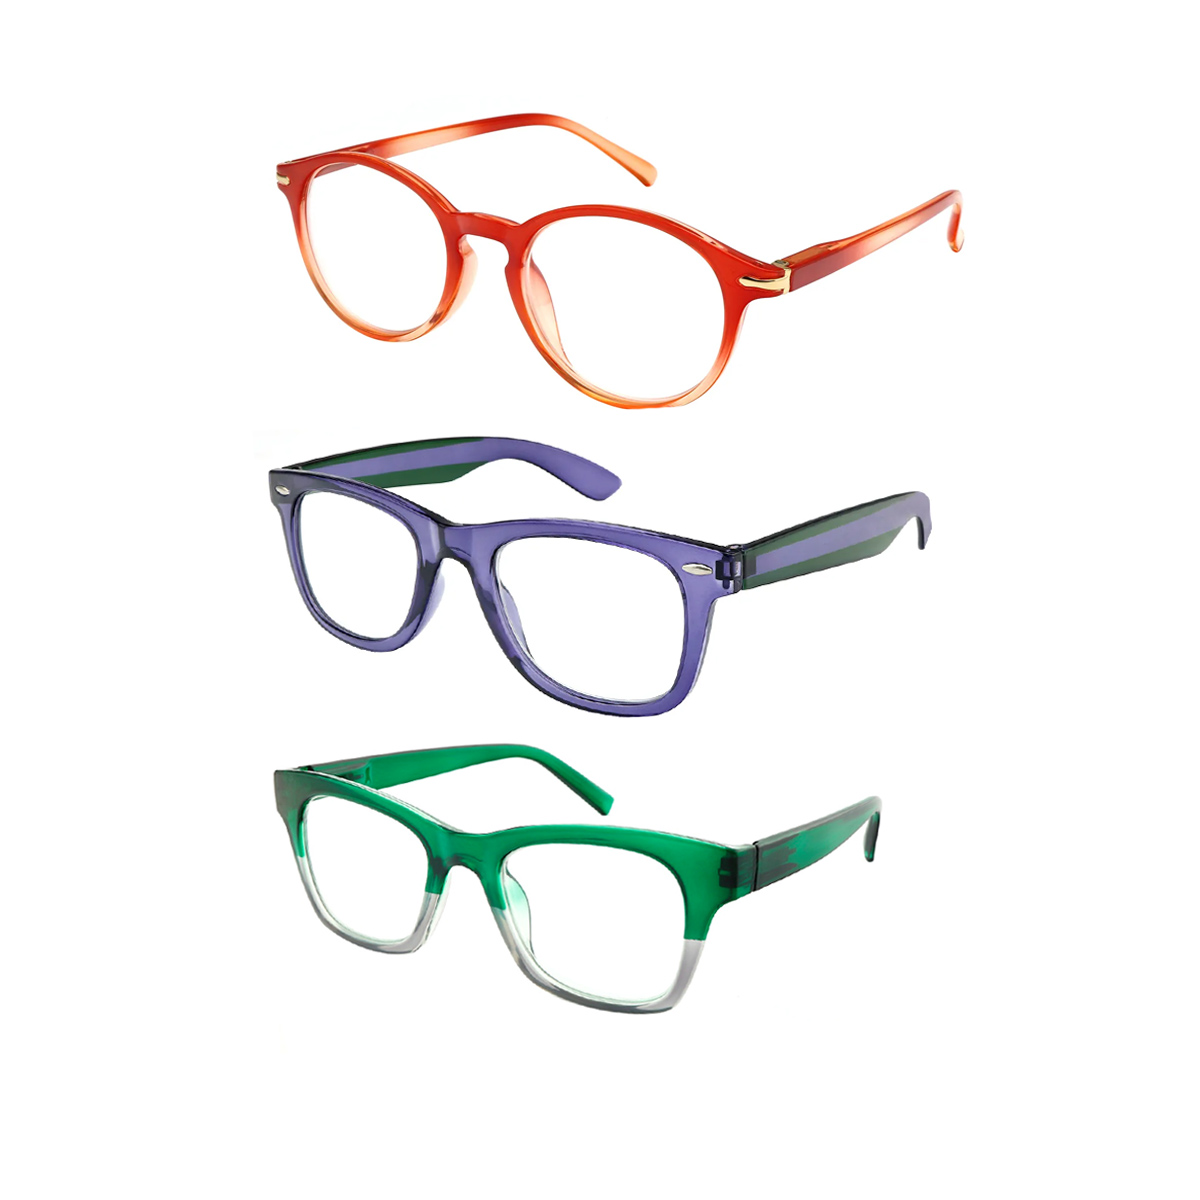 Reading Glasses Collection Pearce $24.99/Set